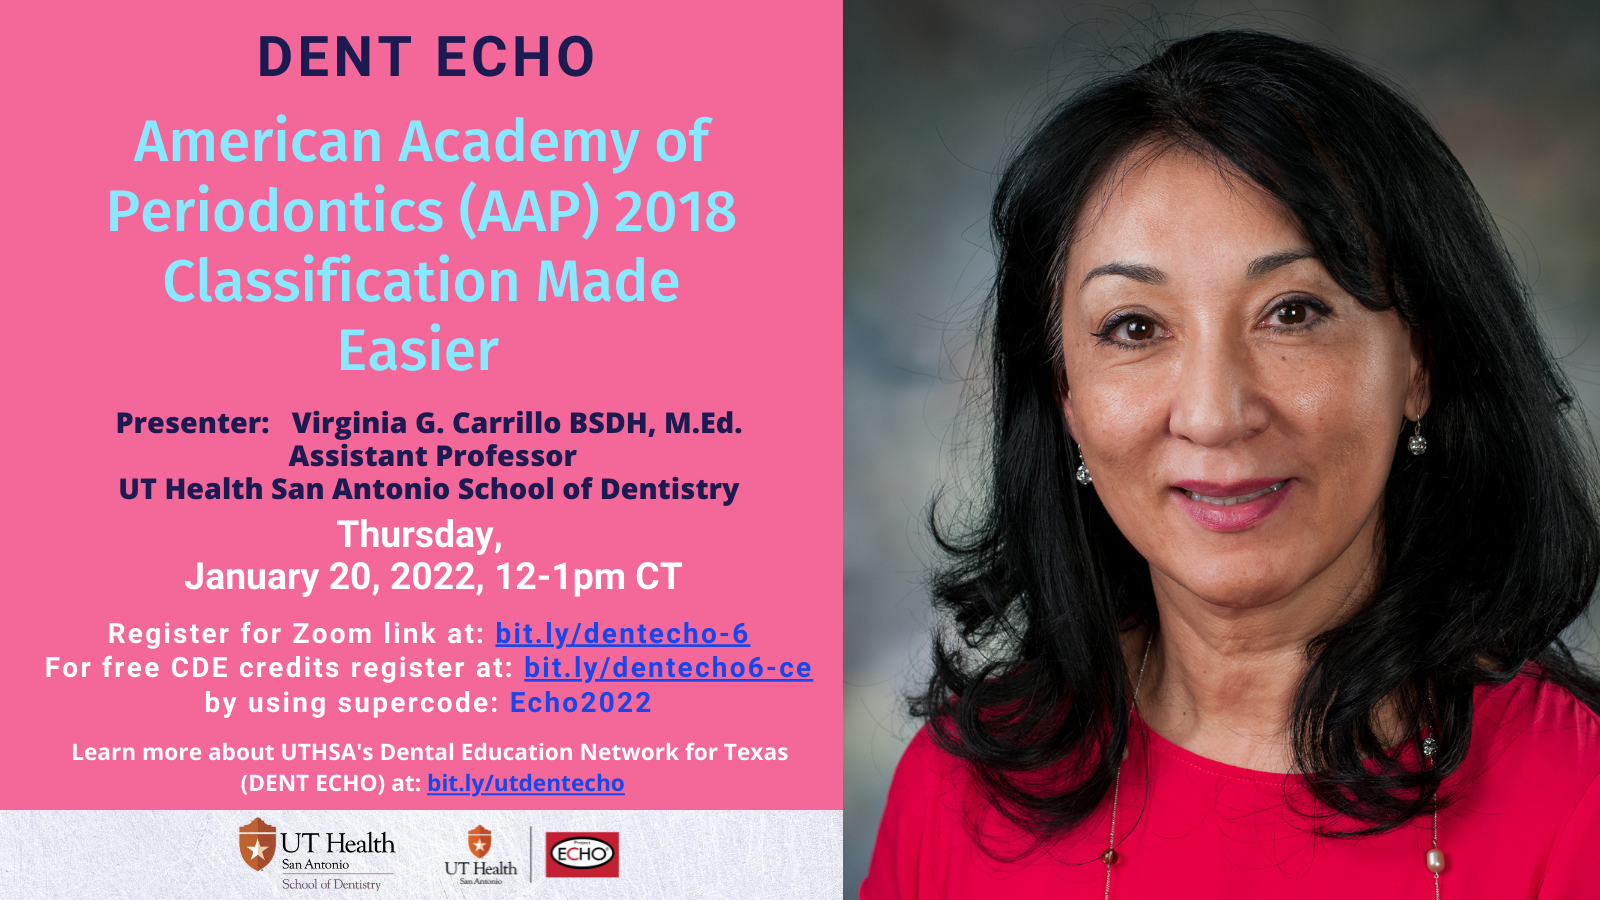 DENT ECHO American Academy of Periodontics 2018 Classification Made Easier Announcement